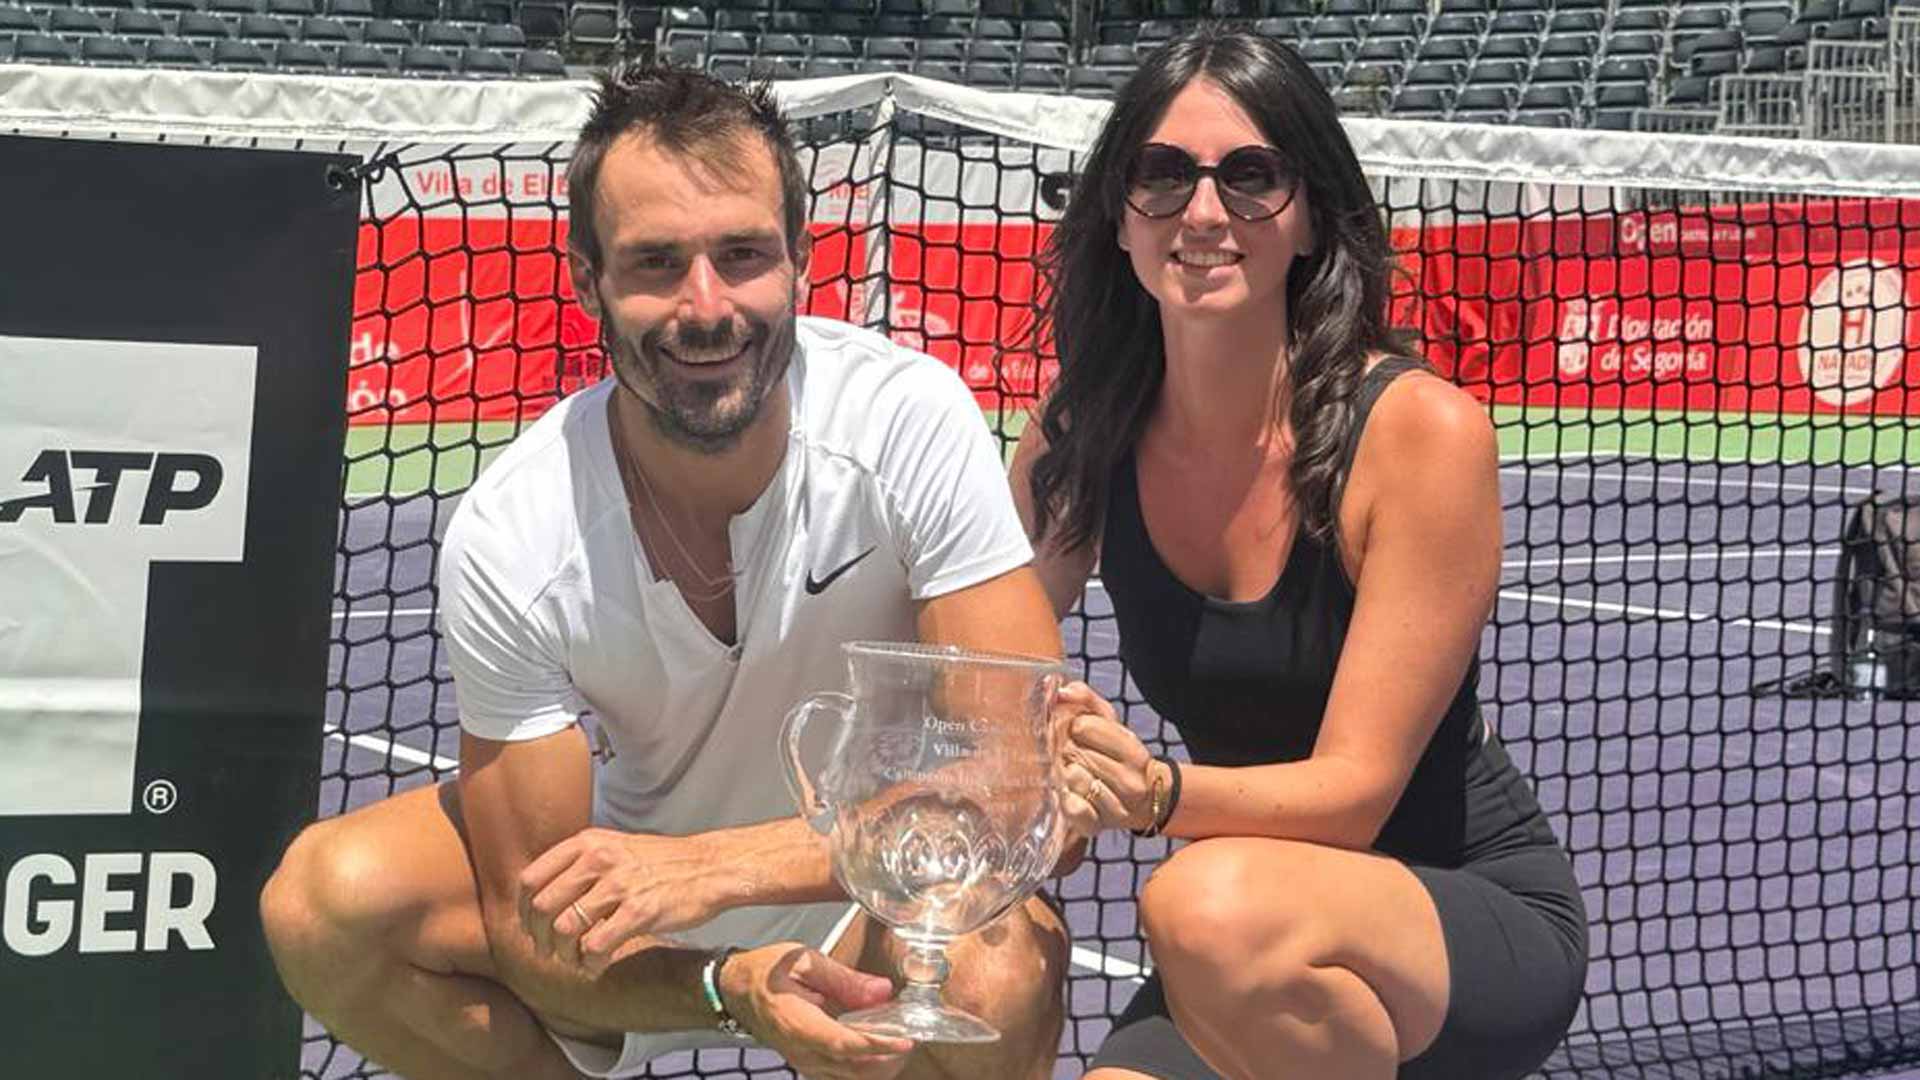 Antoine Escoffier and his wife Yolhen celebrate the Frenchman's first Challenger title.